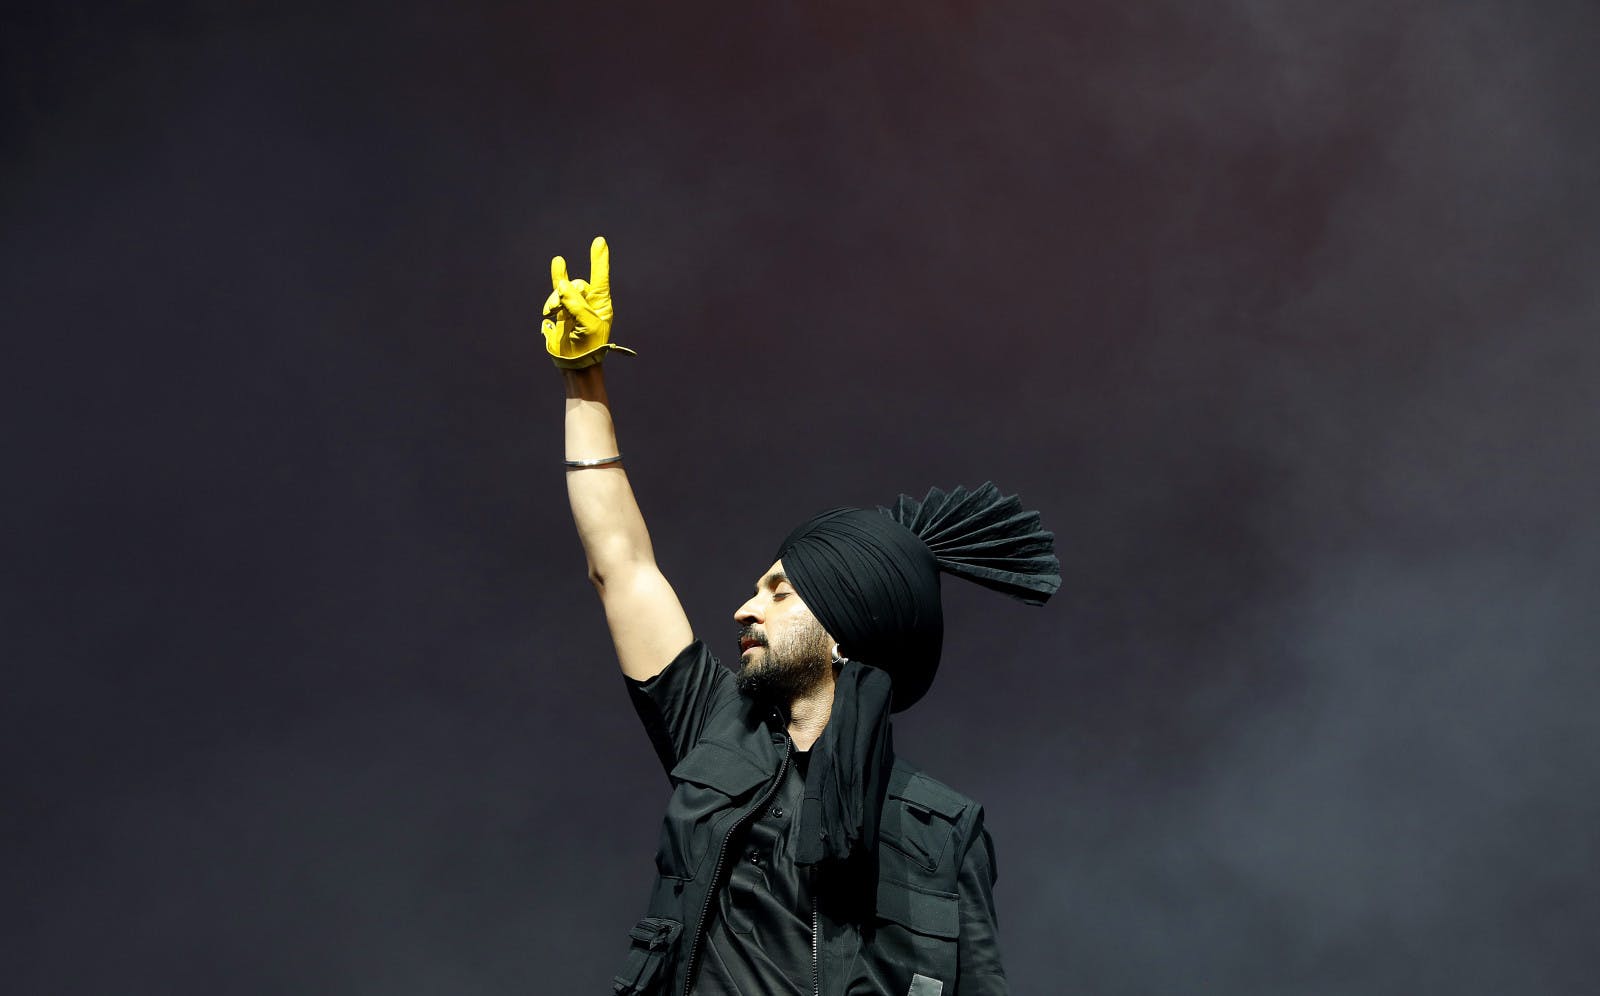 Diljit Dosanjh performs at Coachella weekend one on April 15, 2023 (Christina House / Los Angeles Times via Getty Images)